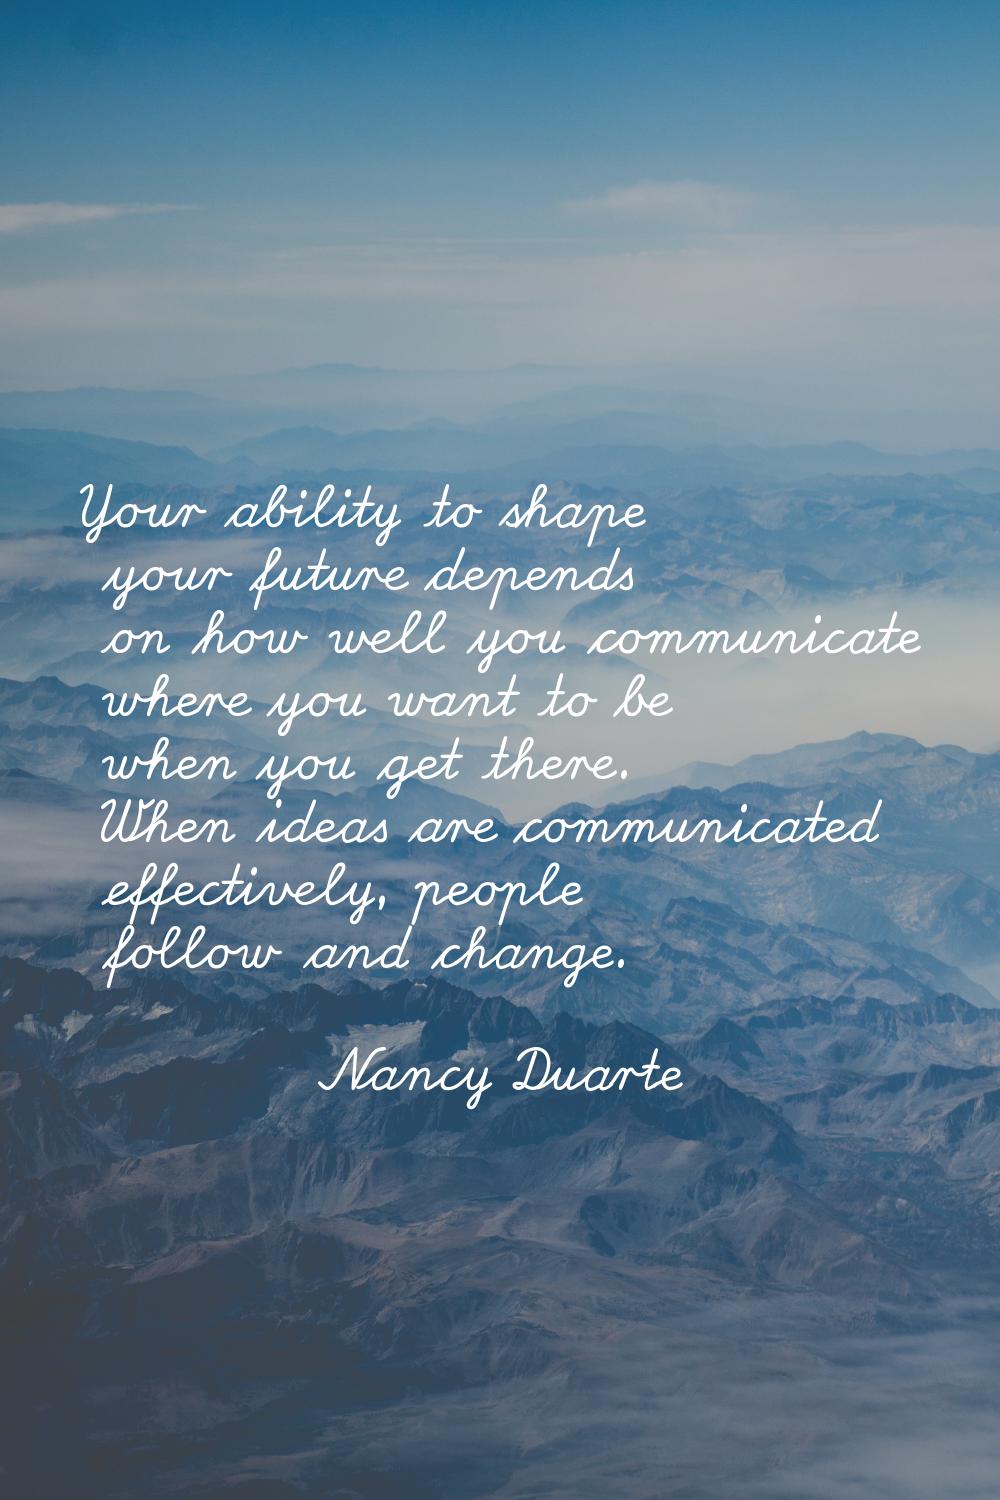 Your ability to shape your future depends on how well you communicate where you want to be when you